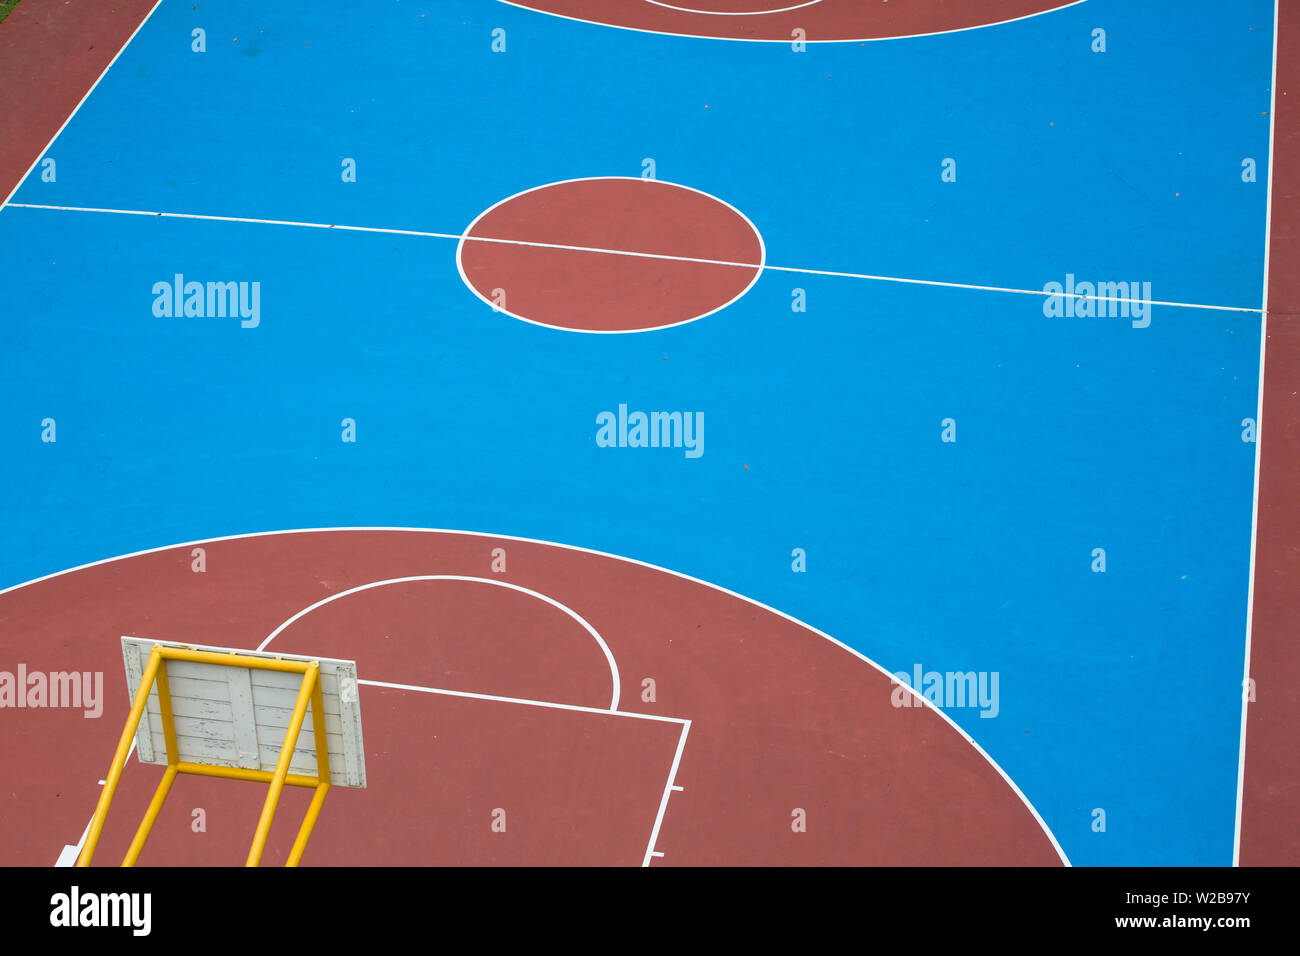 Colours of a basketball court in blue and red surface from aerial perspective Stock Photo